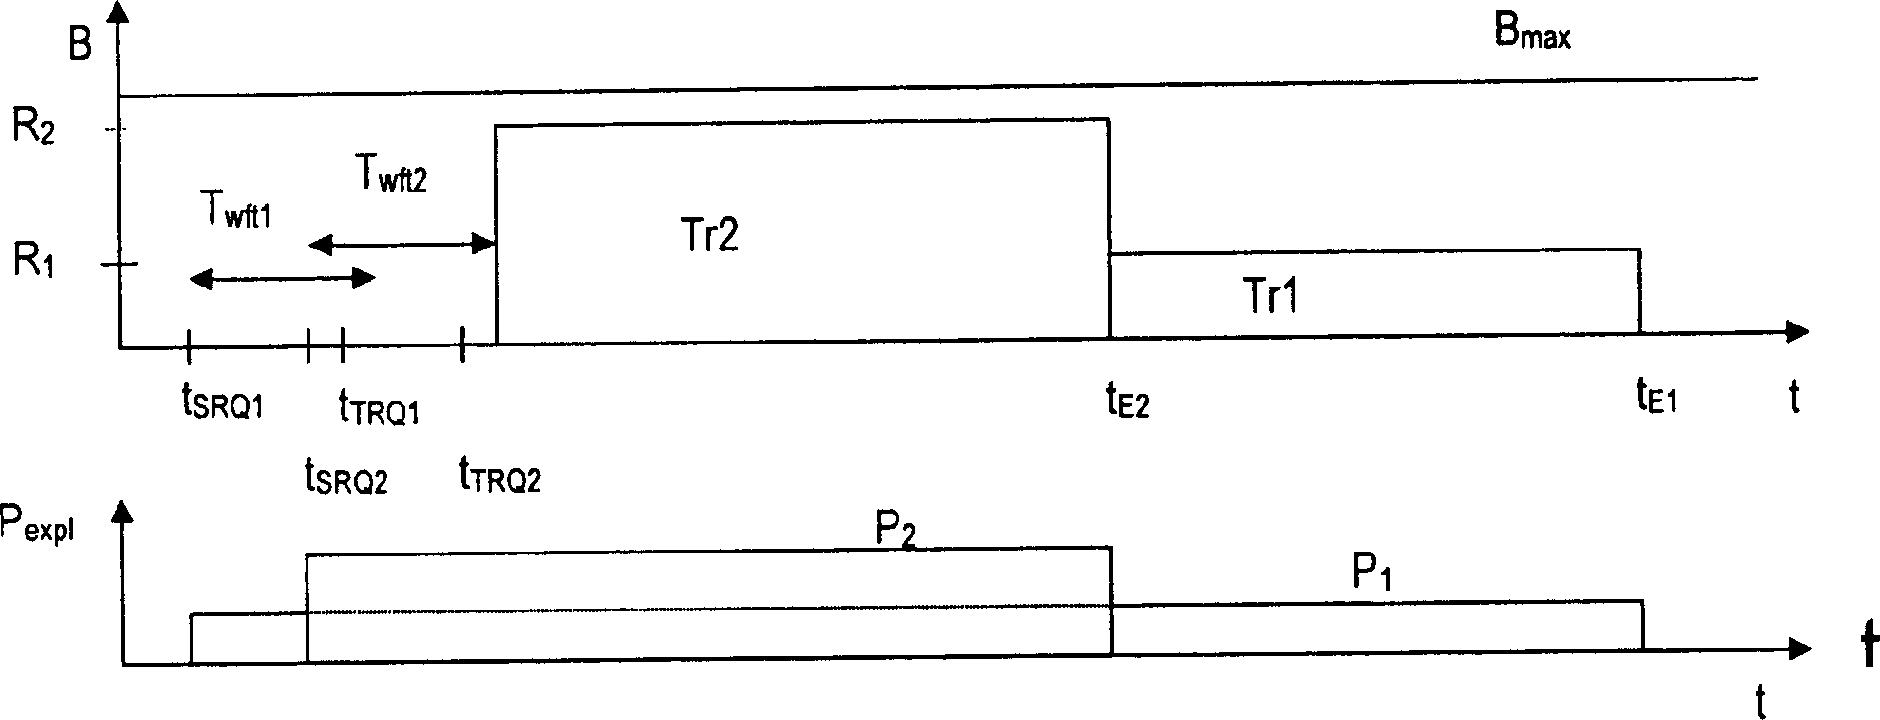 Method for assigning a priority to a data transfer in a network, and network node using the method